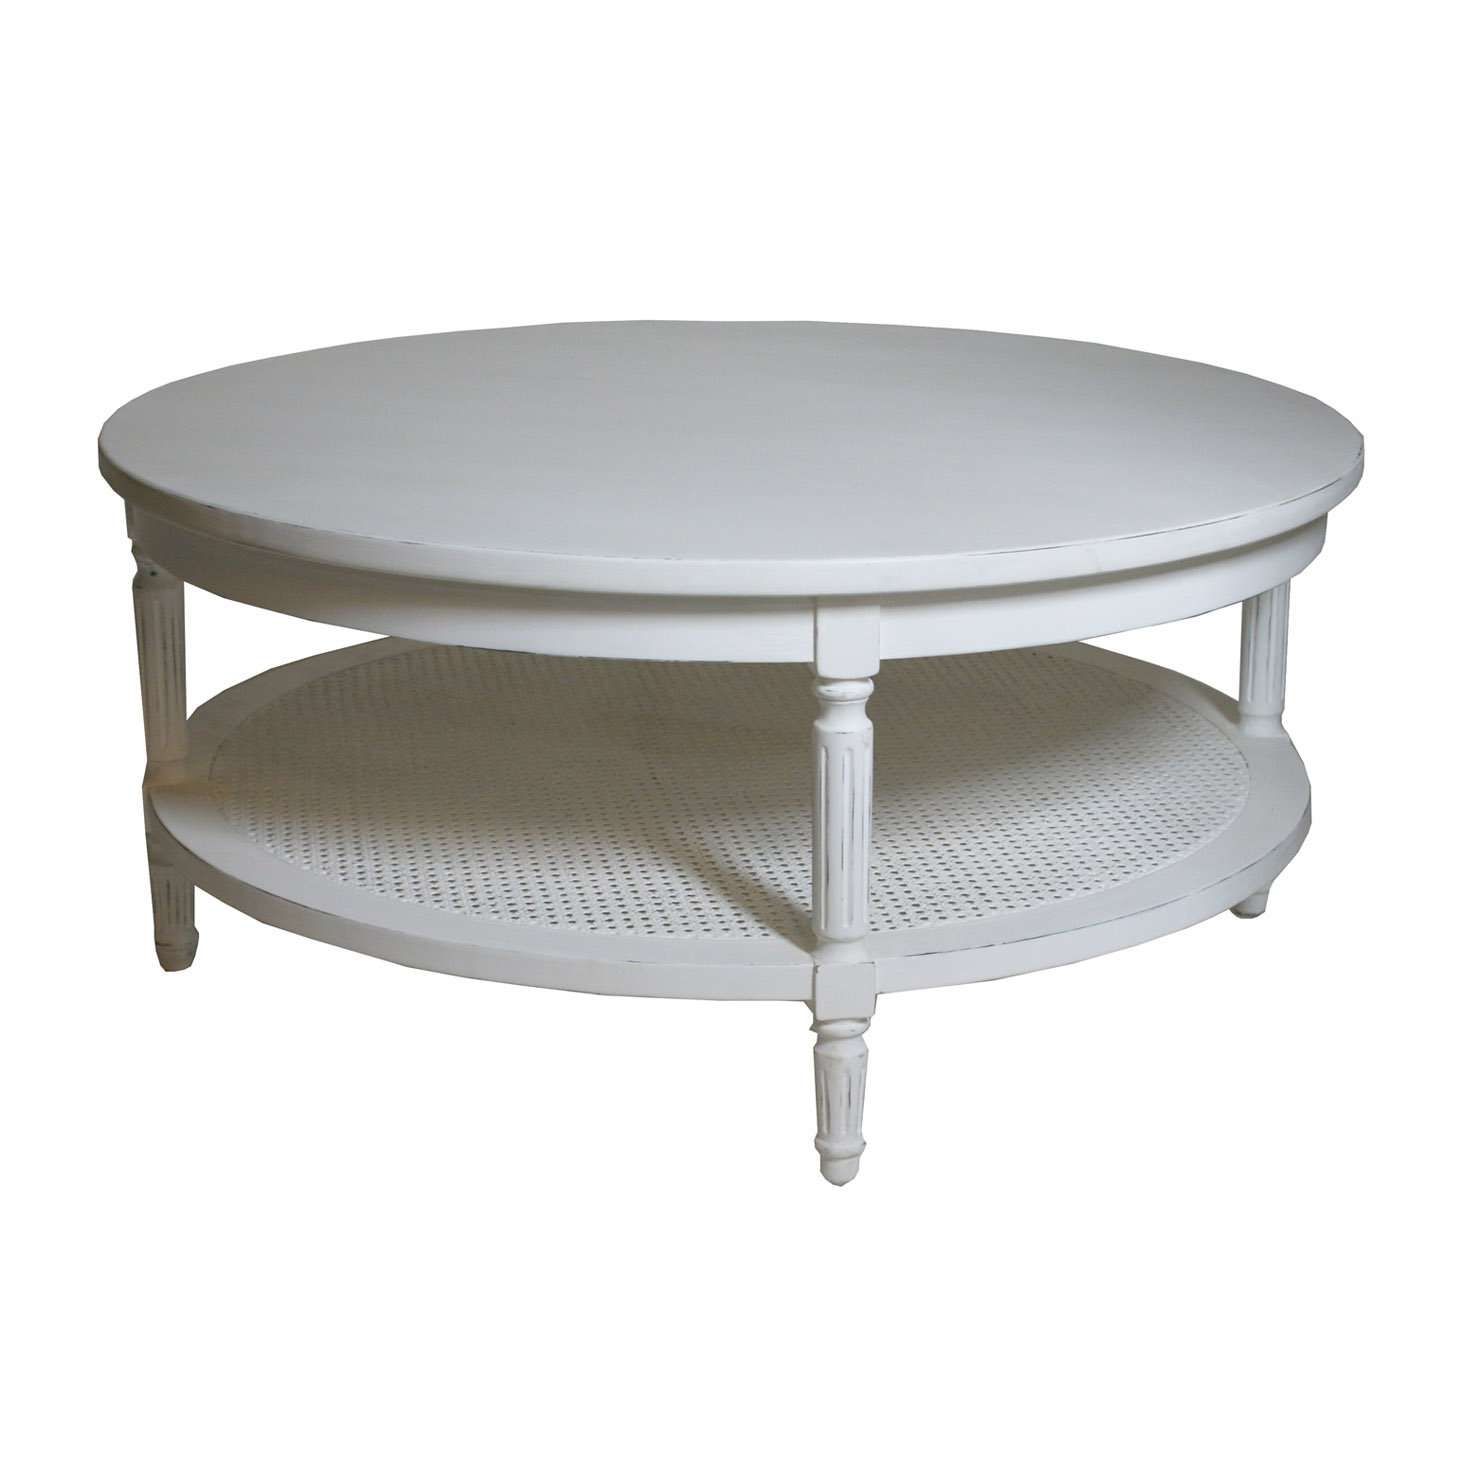 Coffee Tables : Small Round Coffee Table With Storage Coffe Kaoaz In Favorite Circular Coffee Tables With Storage (View 4 of 20)